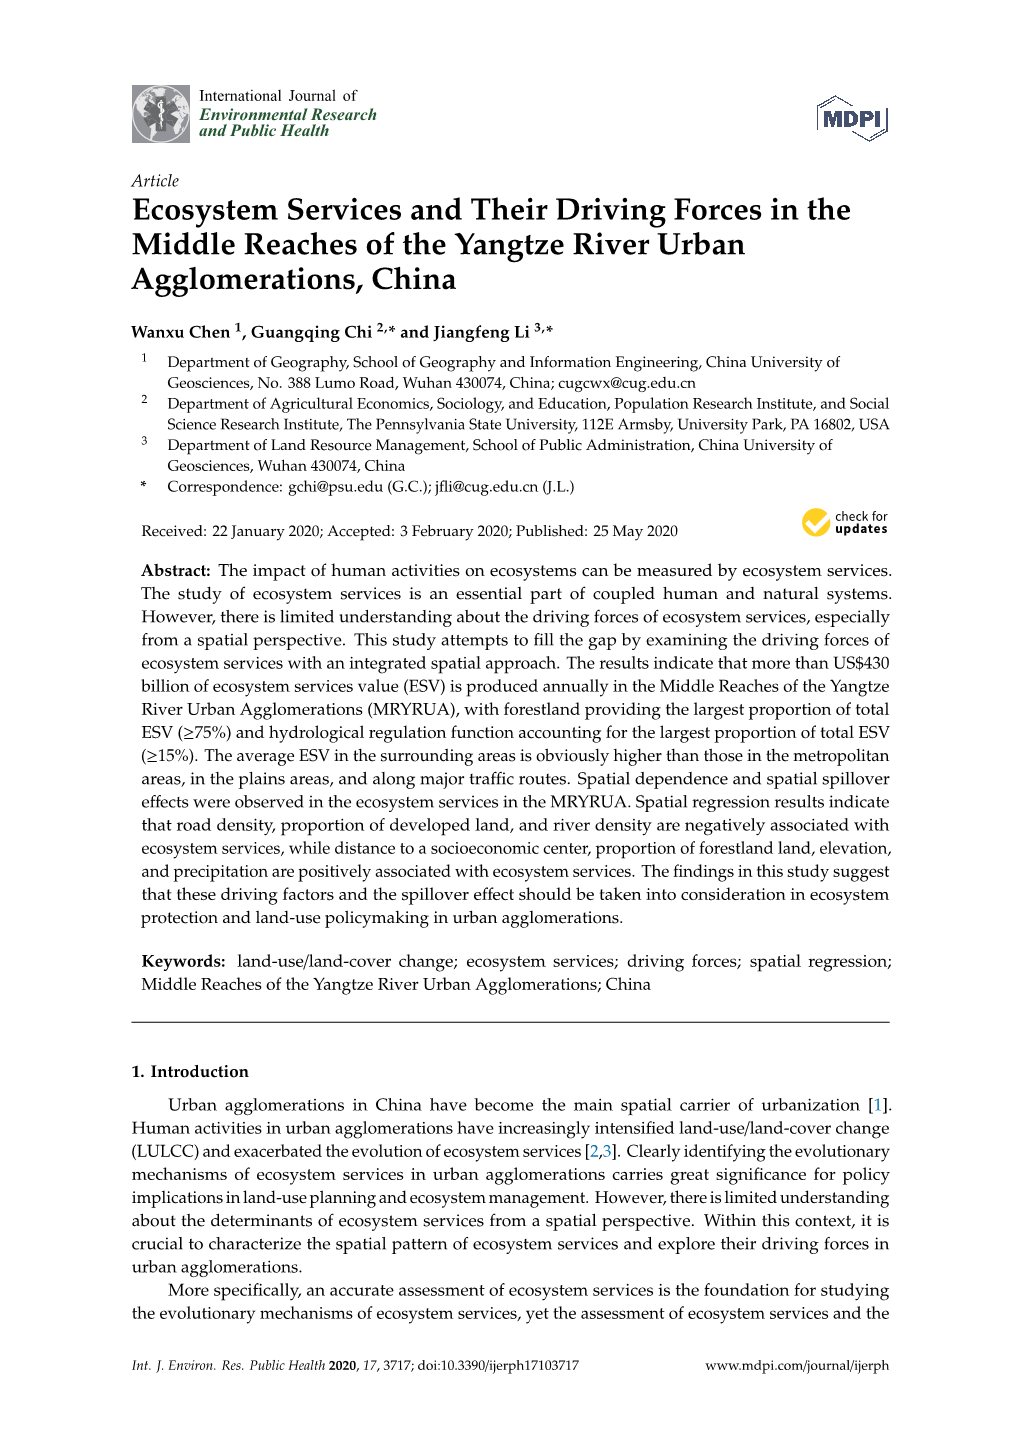 Ecosystem Services and Their Driving Forces in the Middle Reaches of the Yangtze River Urban Agglomerations, China